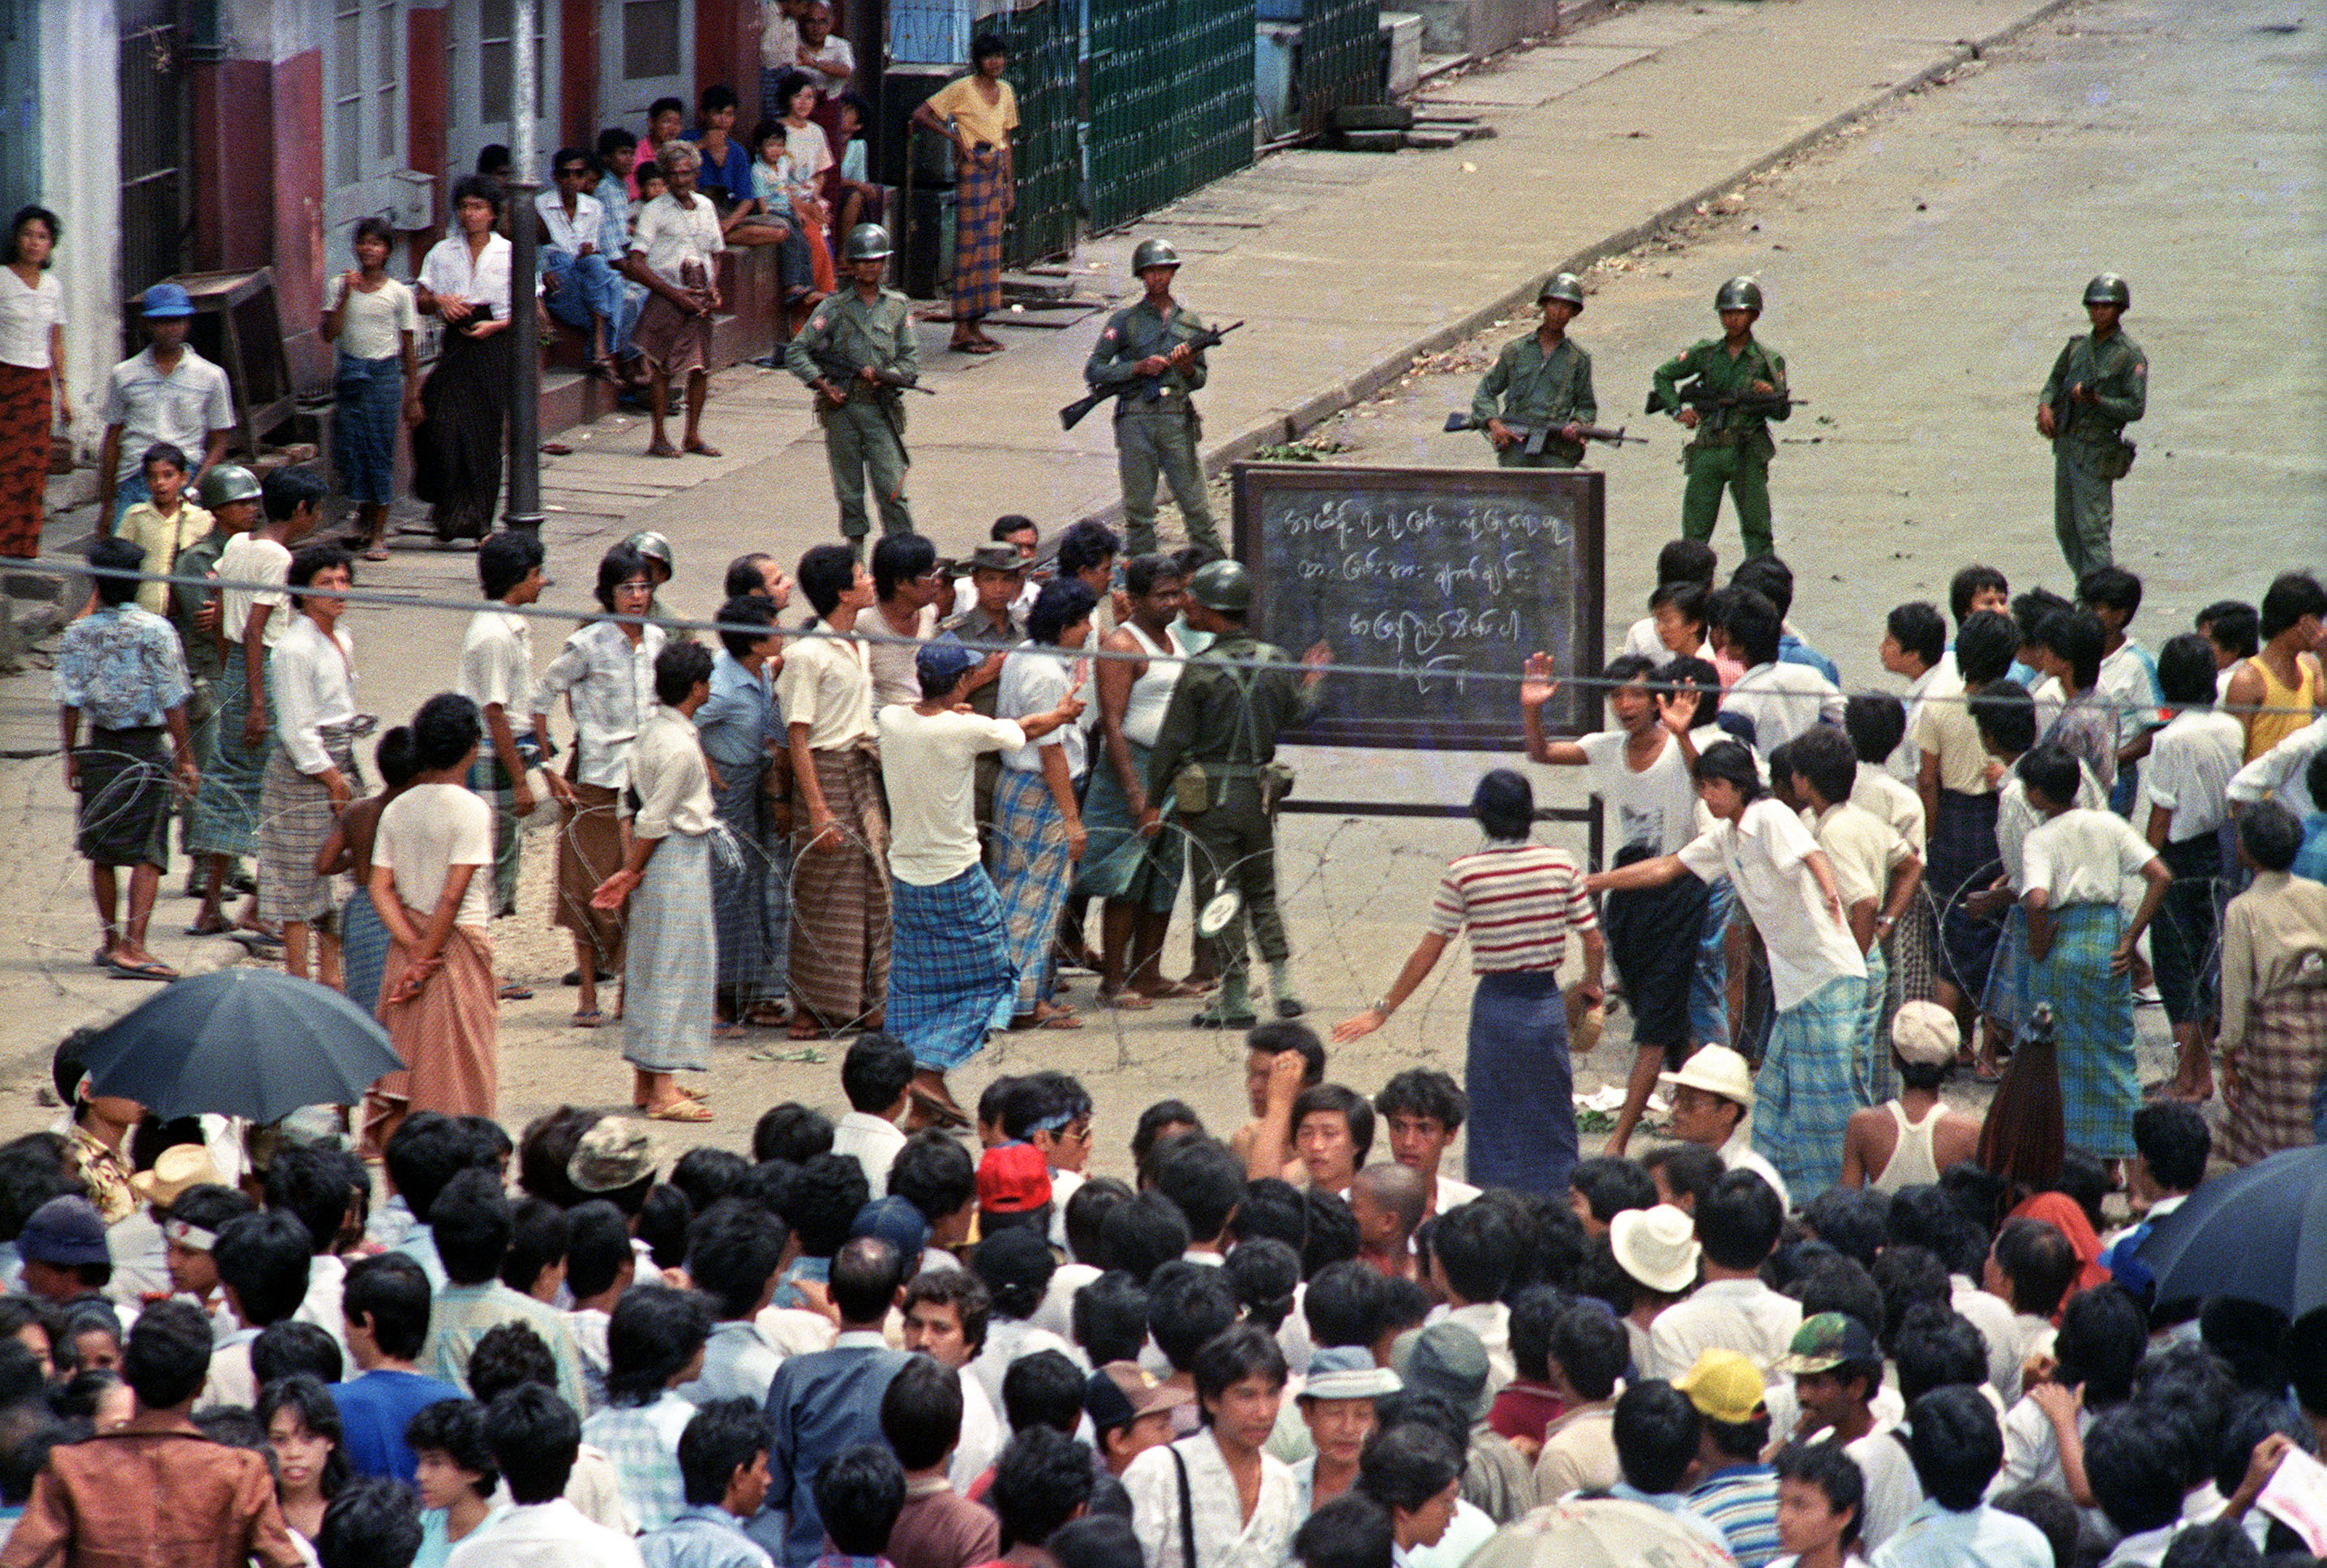 Troops order a crowd 26 Aug. 1988 in downtown Rangoon (Yangon) to disperse in front of sule pagoda sealed off by barbed wires. (Tommaso Villani—AFP/Getty Images)